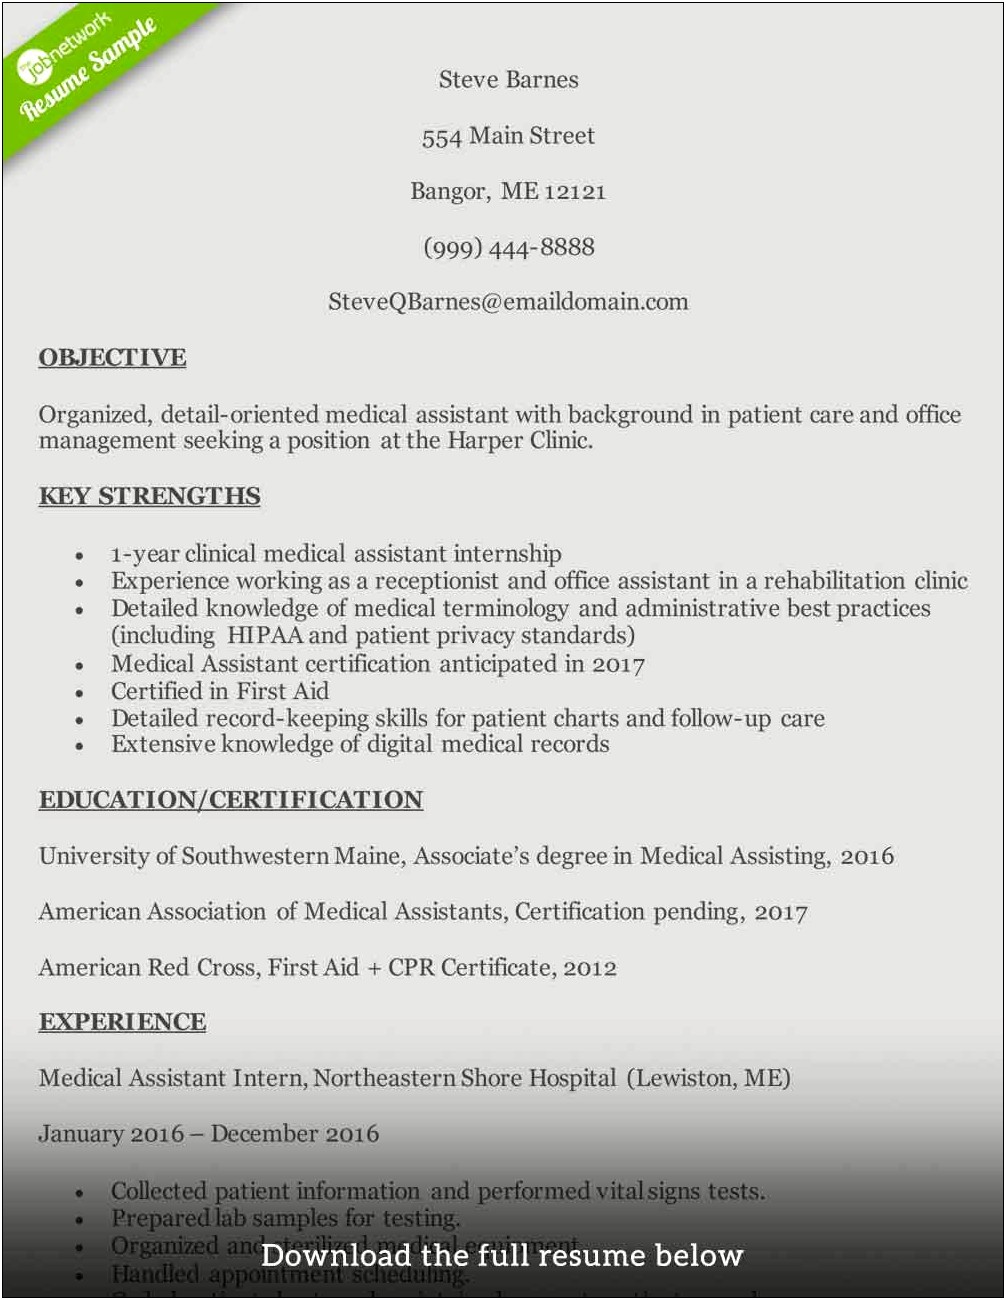 A Good Medical Assistant Resumes Objective